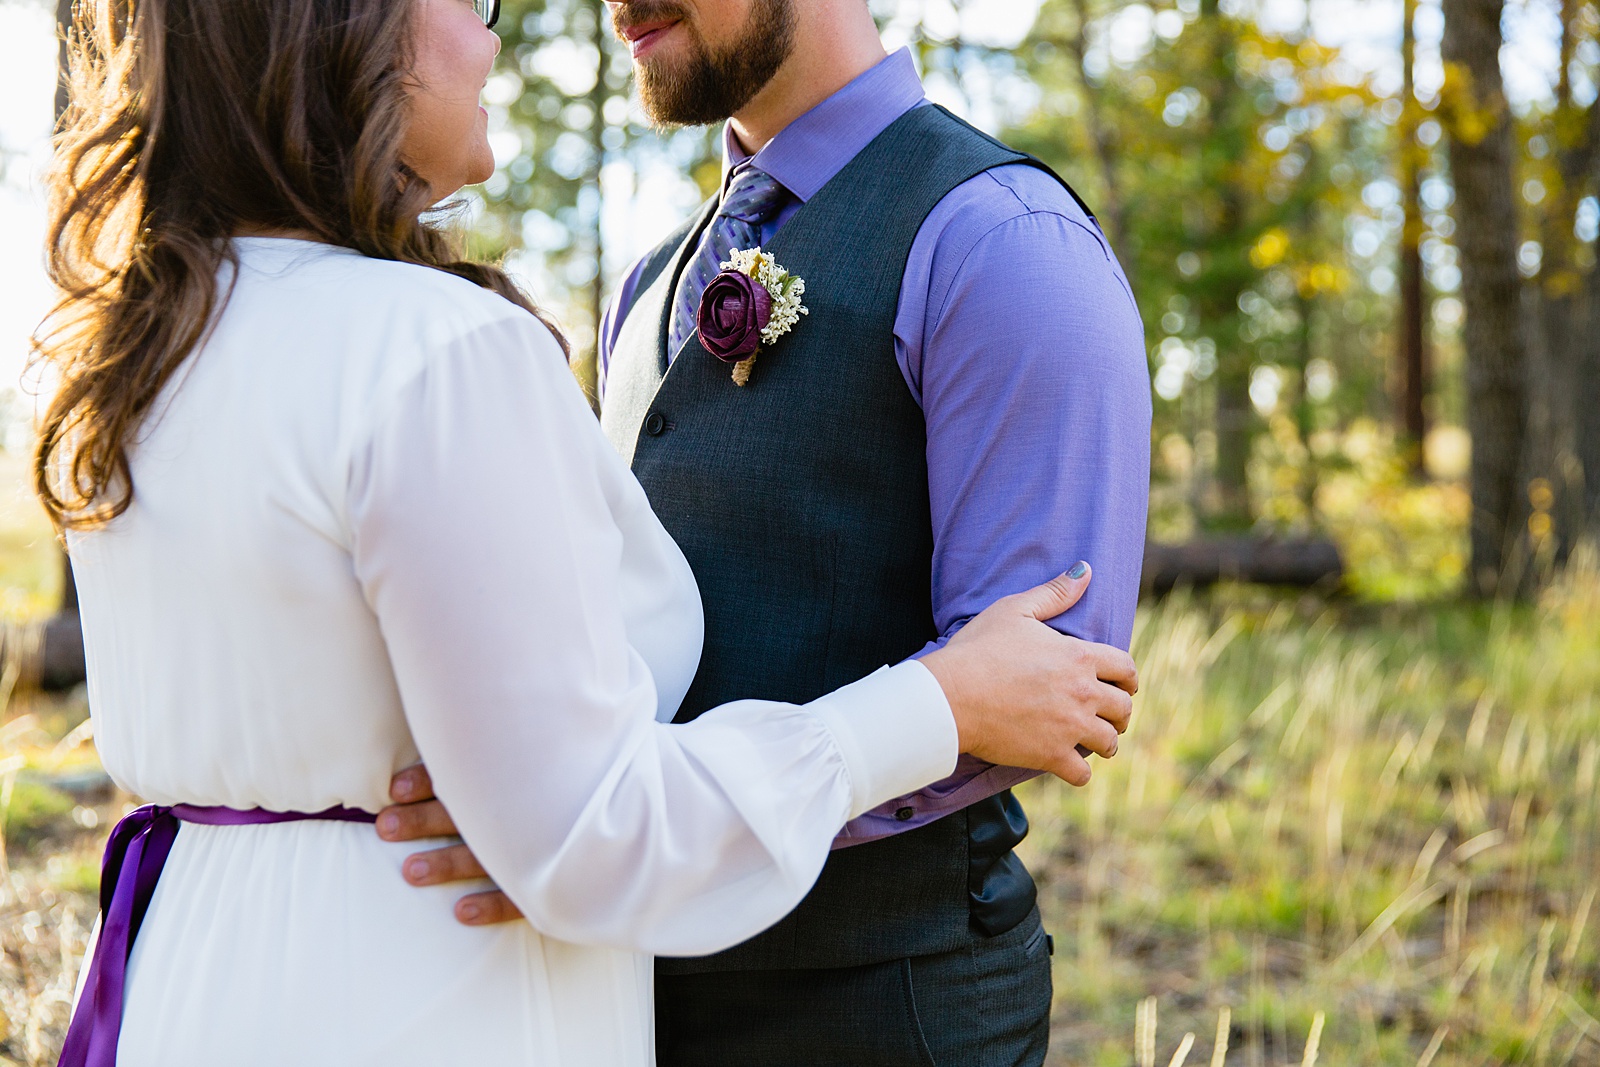 Bride and Groom share an intimate moment during their Mogollon Rim elopement by Payson elopement photographer PMA Photography.